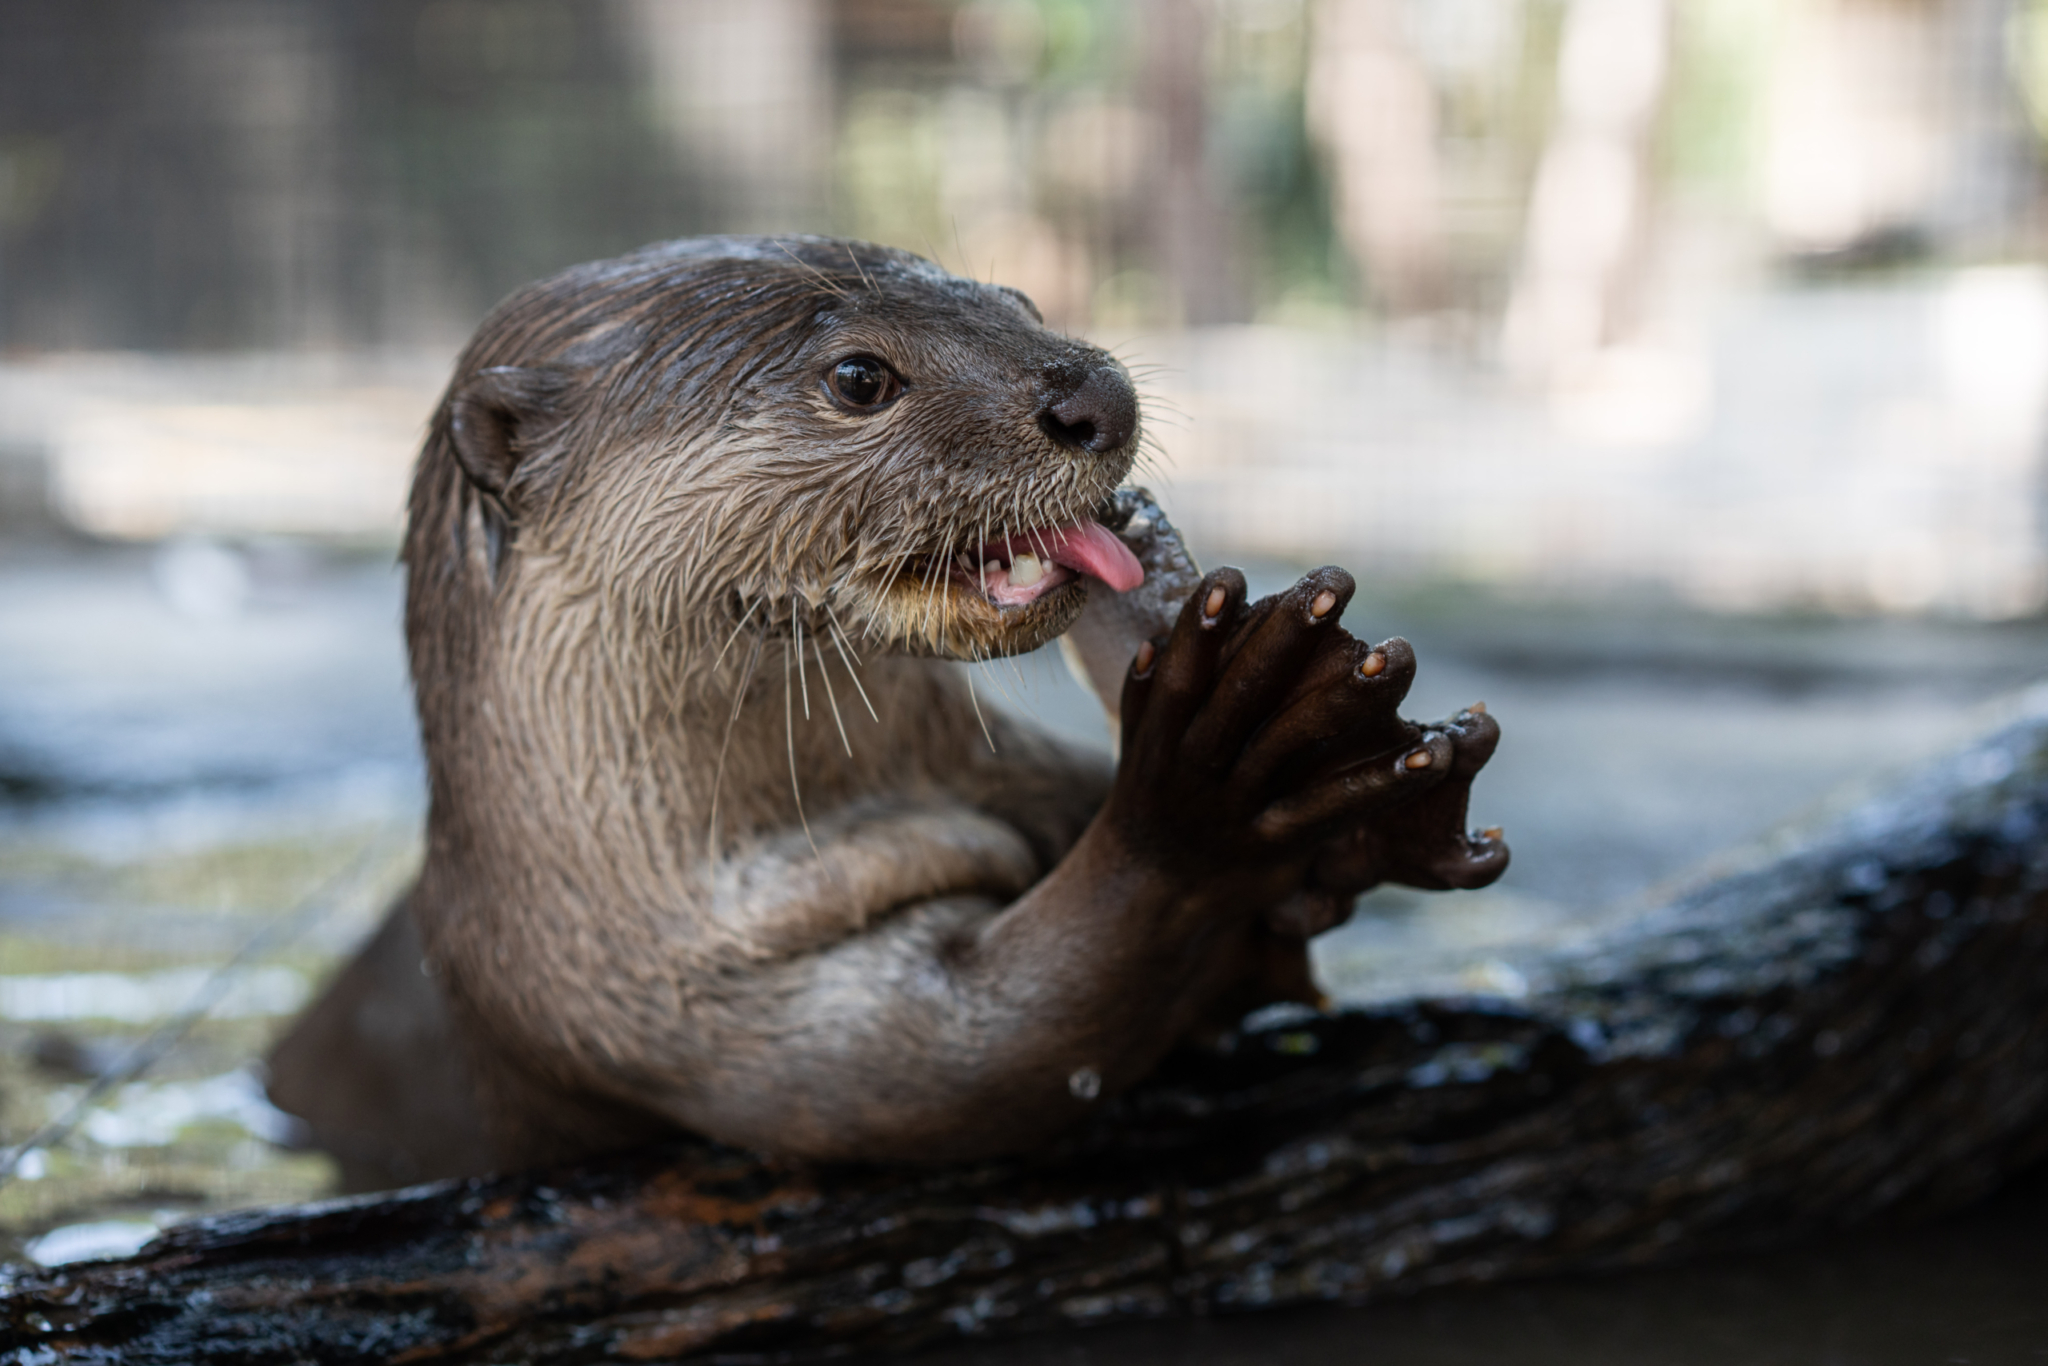 Smooth-Coated Otter - Facts, Diet, Habitat & Pictures on